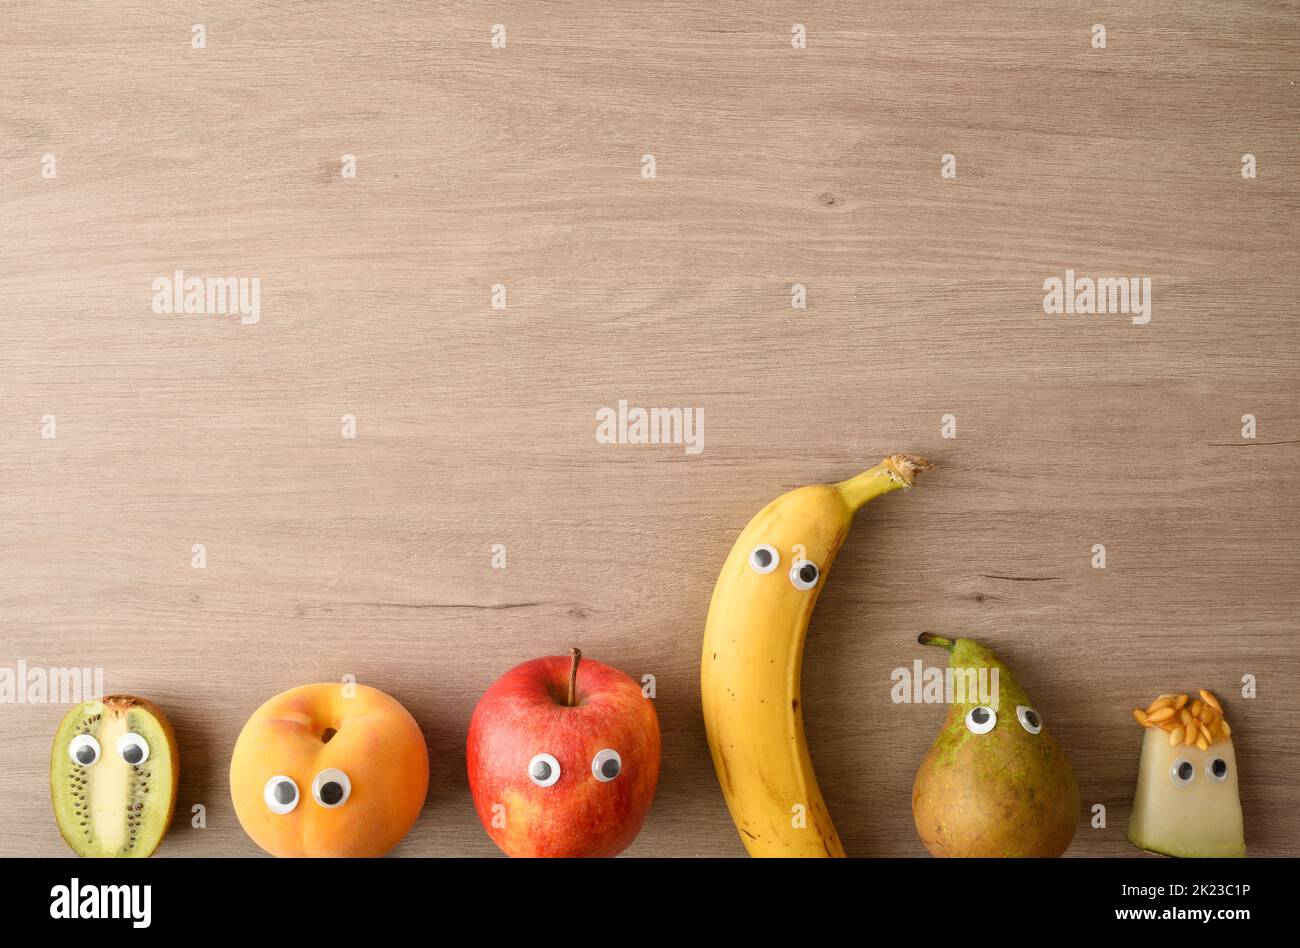 Background of row of funny fruit with eyes on wooden bench as a concept for motivating children to eat. Top view. Stock Photo